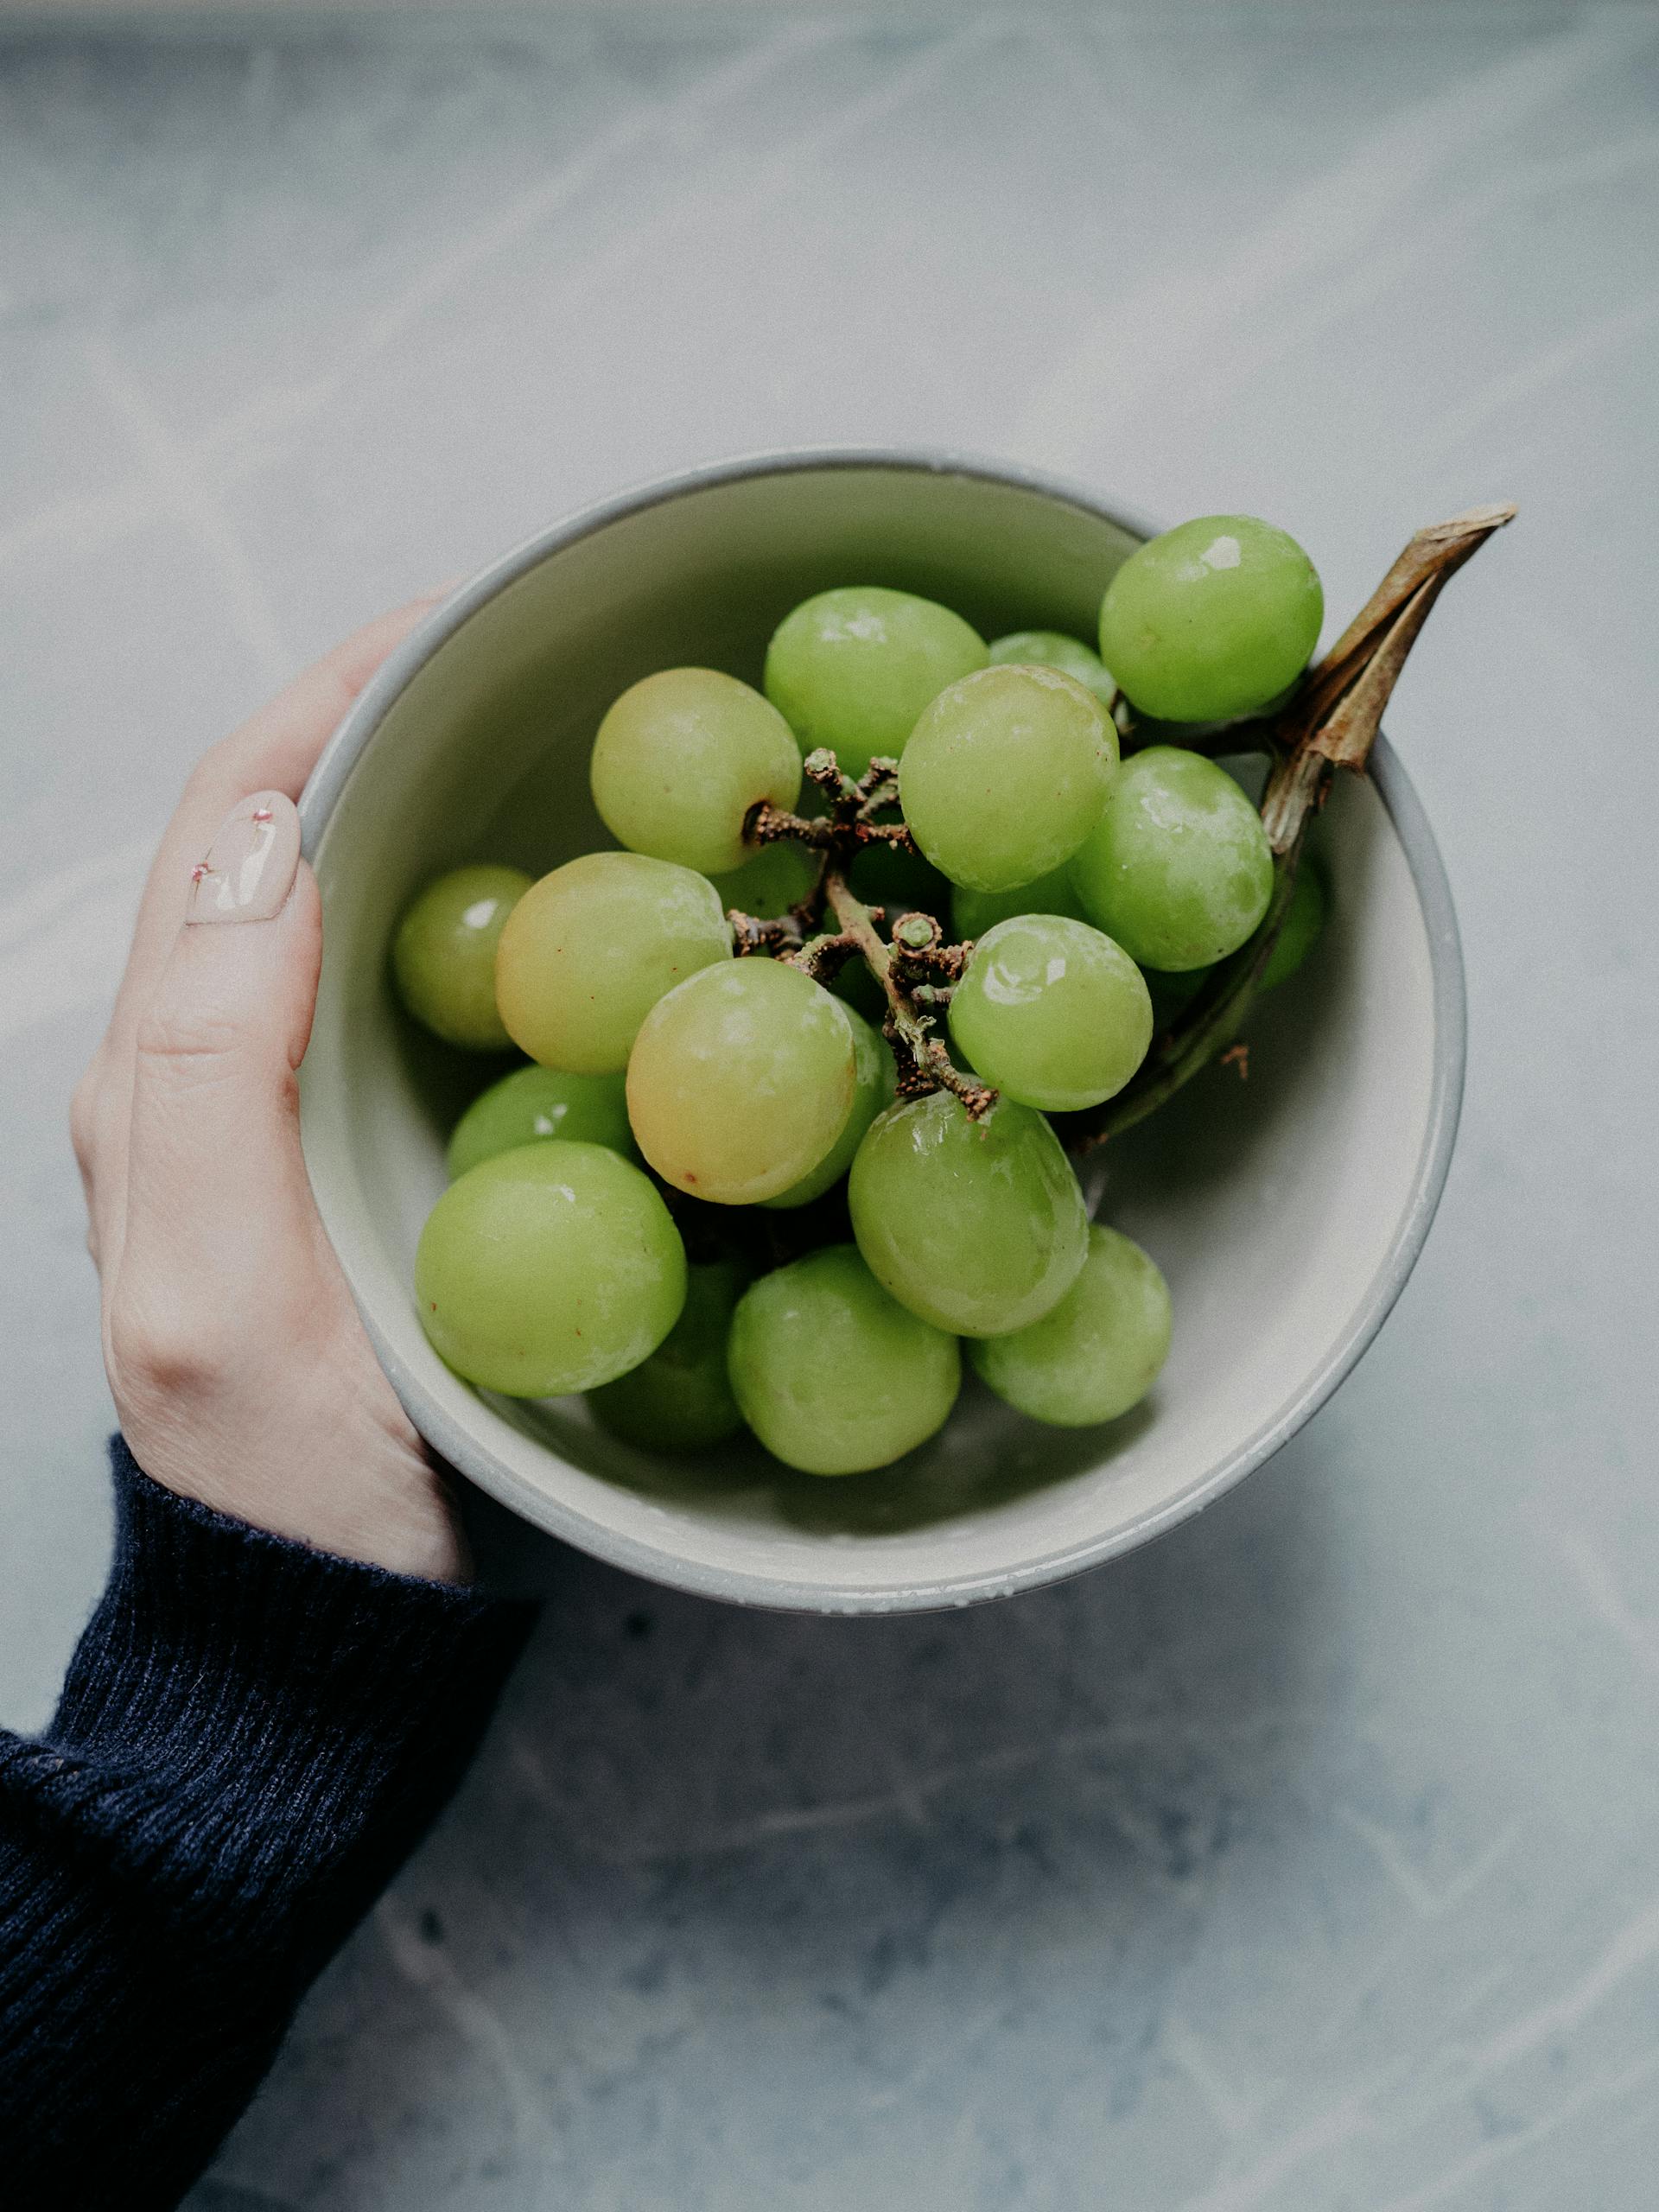 A person holding a bowl of grapes | Source: Pexels